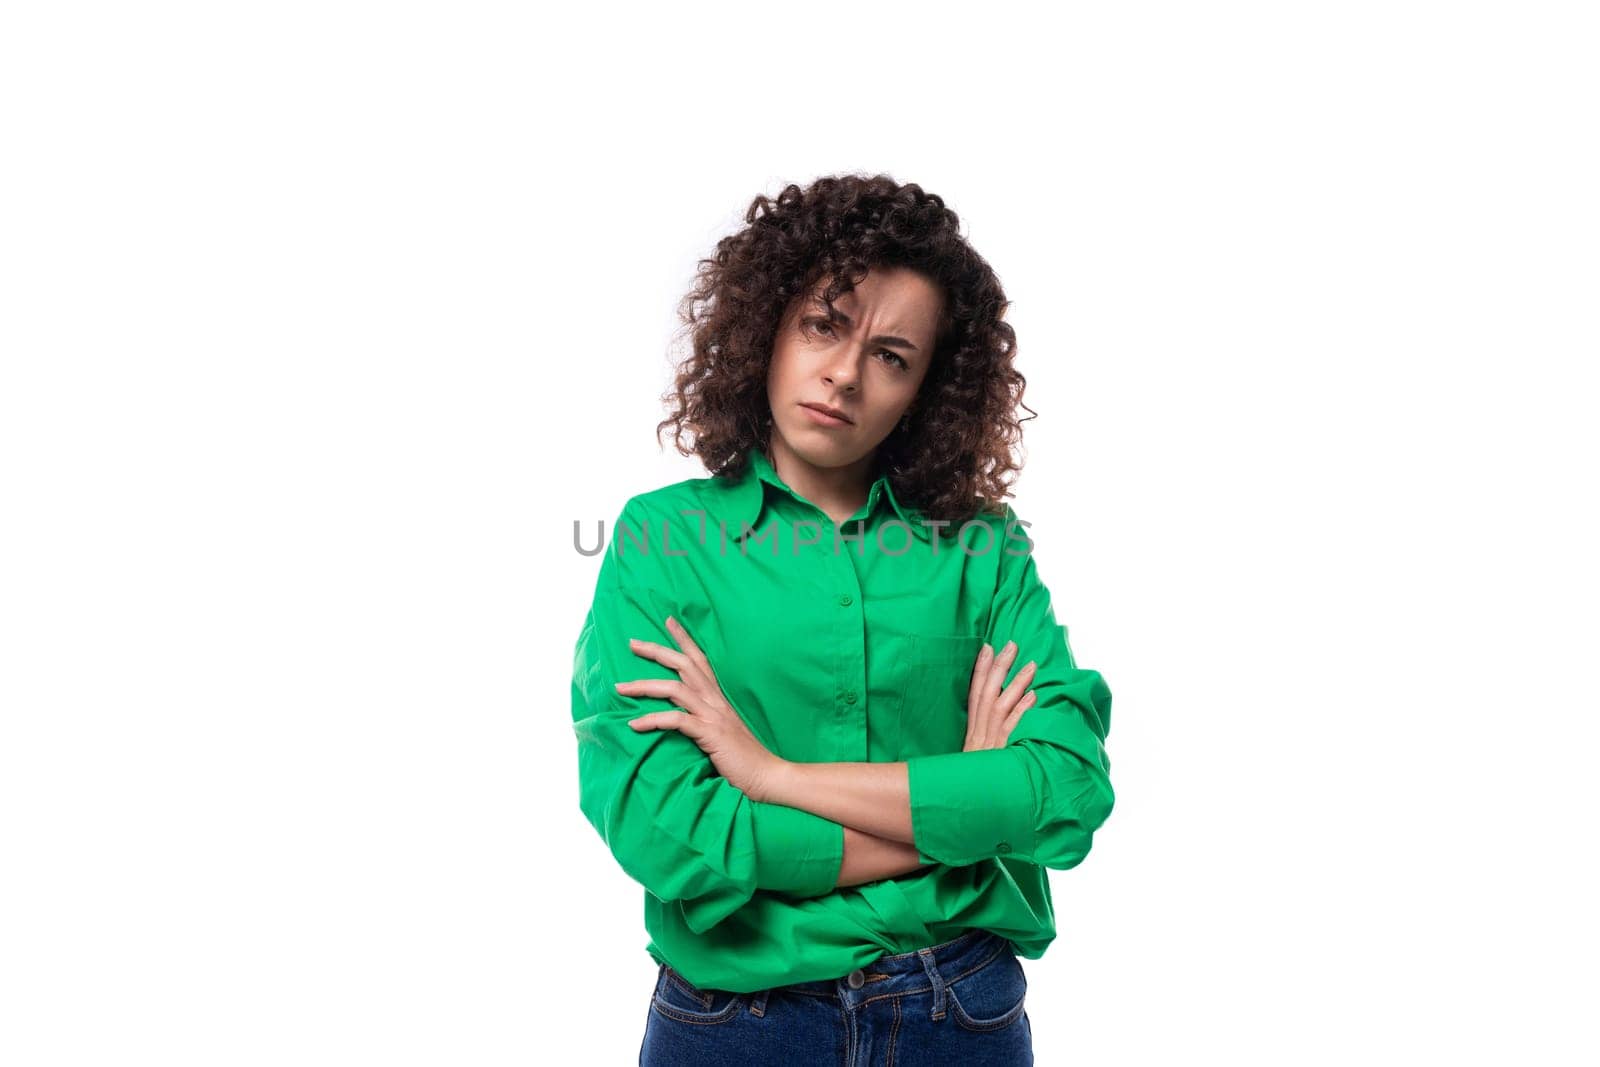 serious young woman with black curly hair dressed in a green shirt on a white background.